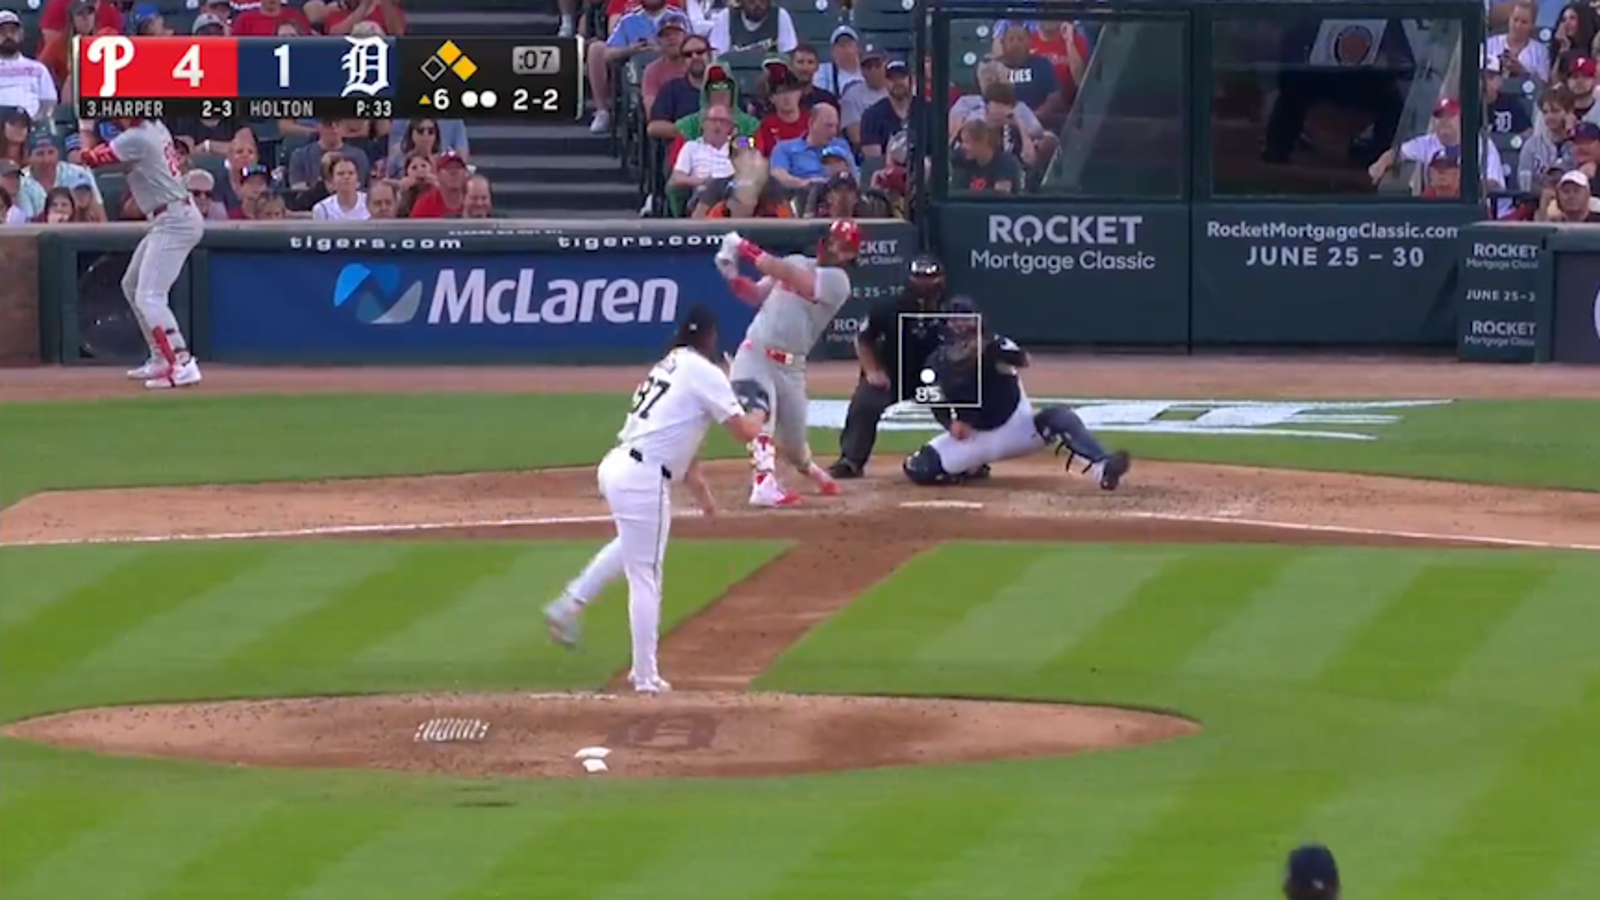 Bryce Harper slams a three-run home run to extend the Phillies' lead over the Tigers